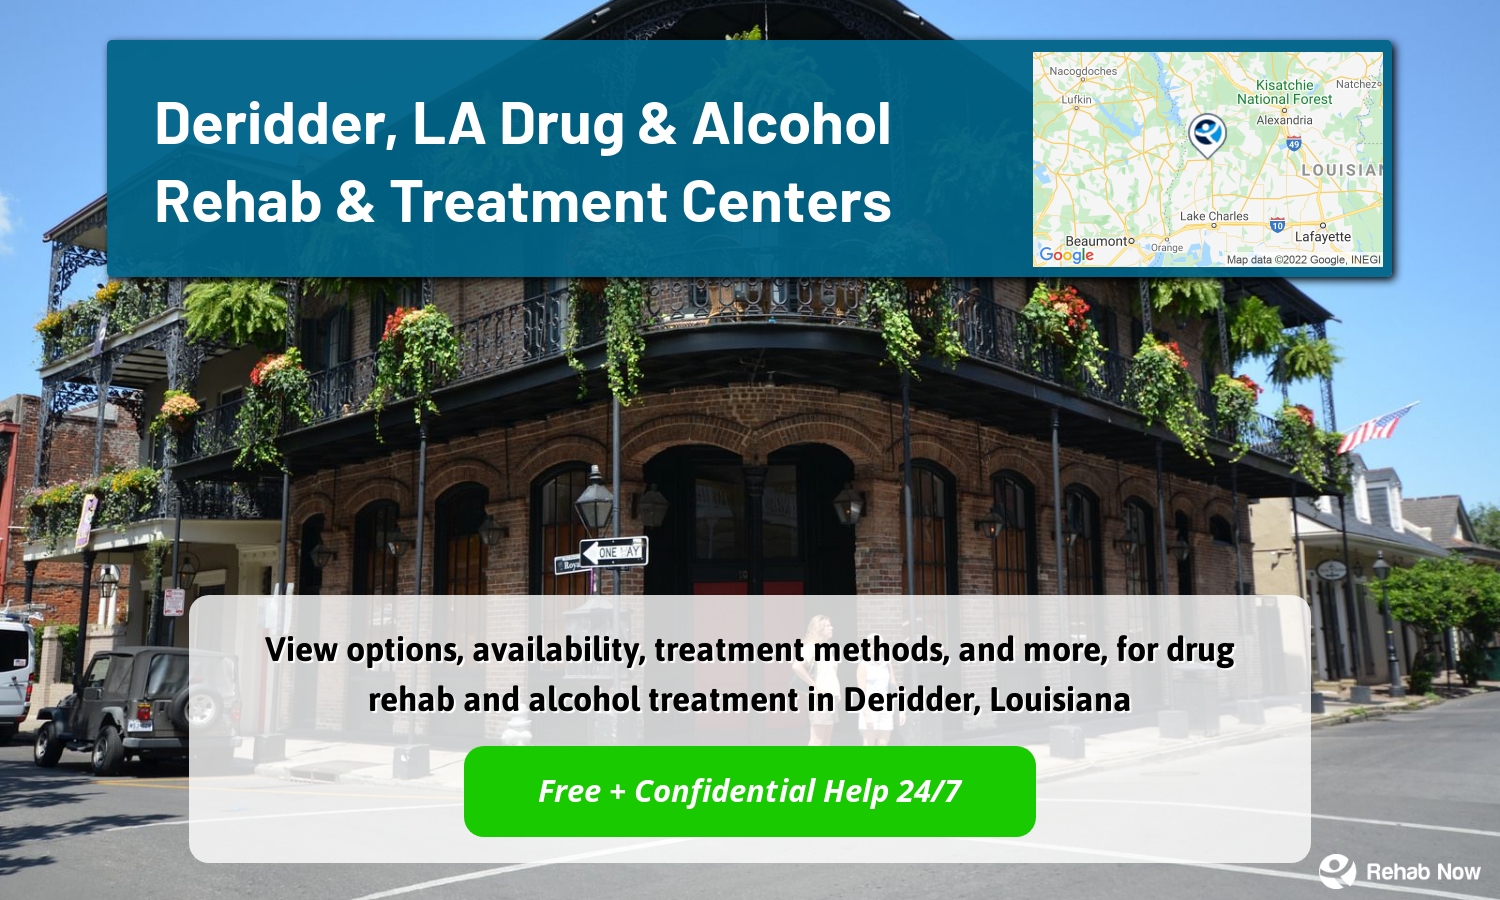 View options, availability, treatment methods, and more, for drug rehab and alcohol treatment in Deridder, Louisiana